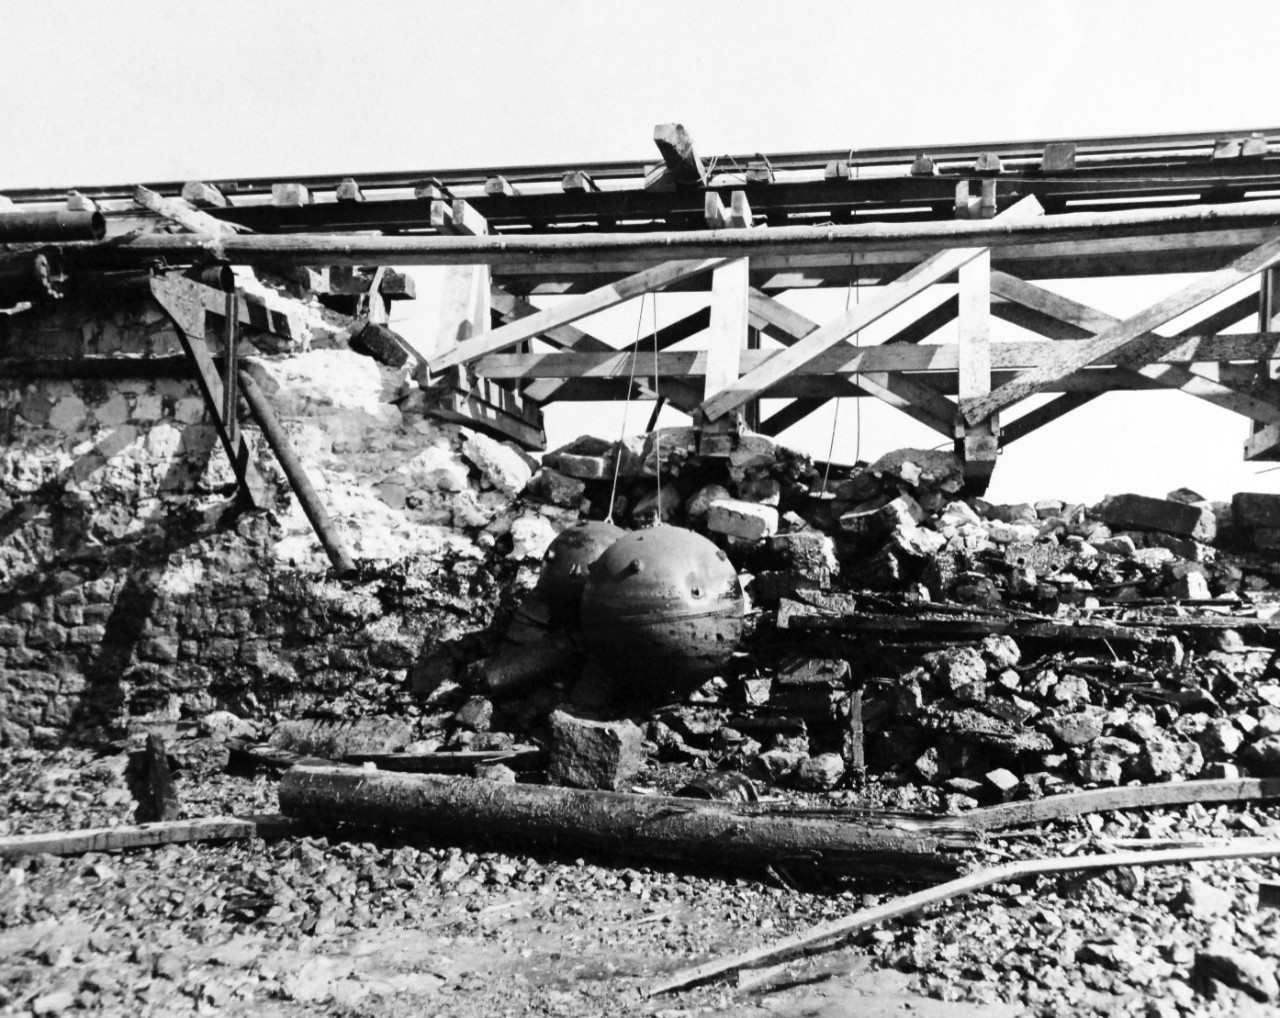 80-G-257404:   Invasion of France, Le Havre, August-September 1944.   After Allied occupation of Le Havre, France, German mines were found lashed to railroad causeway with cables attached to set off charge, 28 September 1944.  Official U.S. Navy Photograph, now in the collection of the National Archives.   (2014/10/28).  